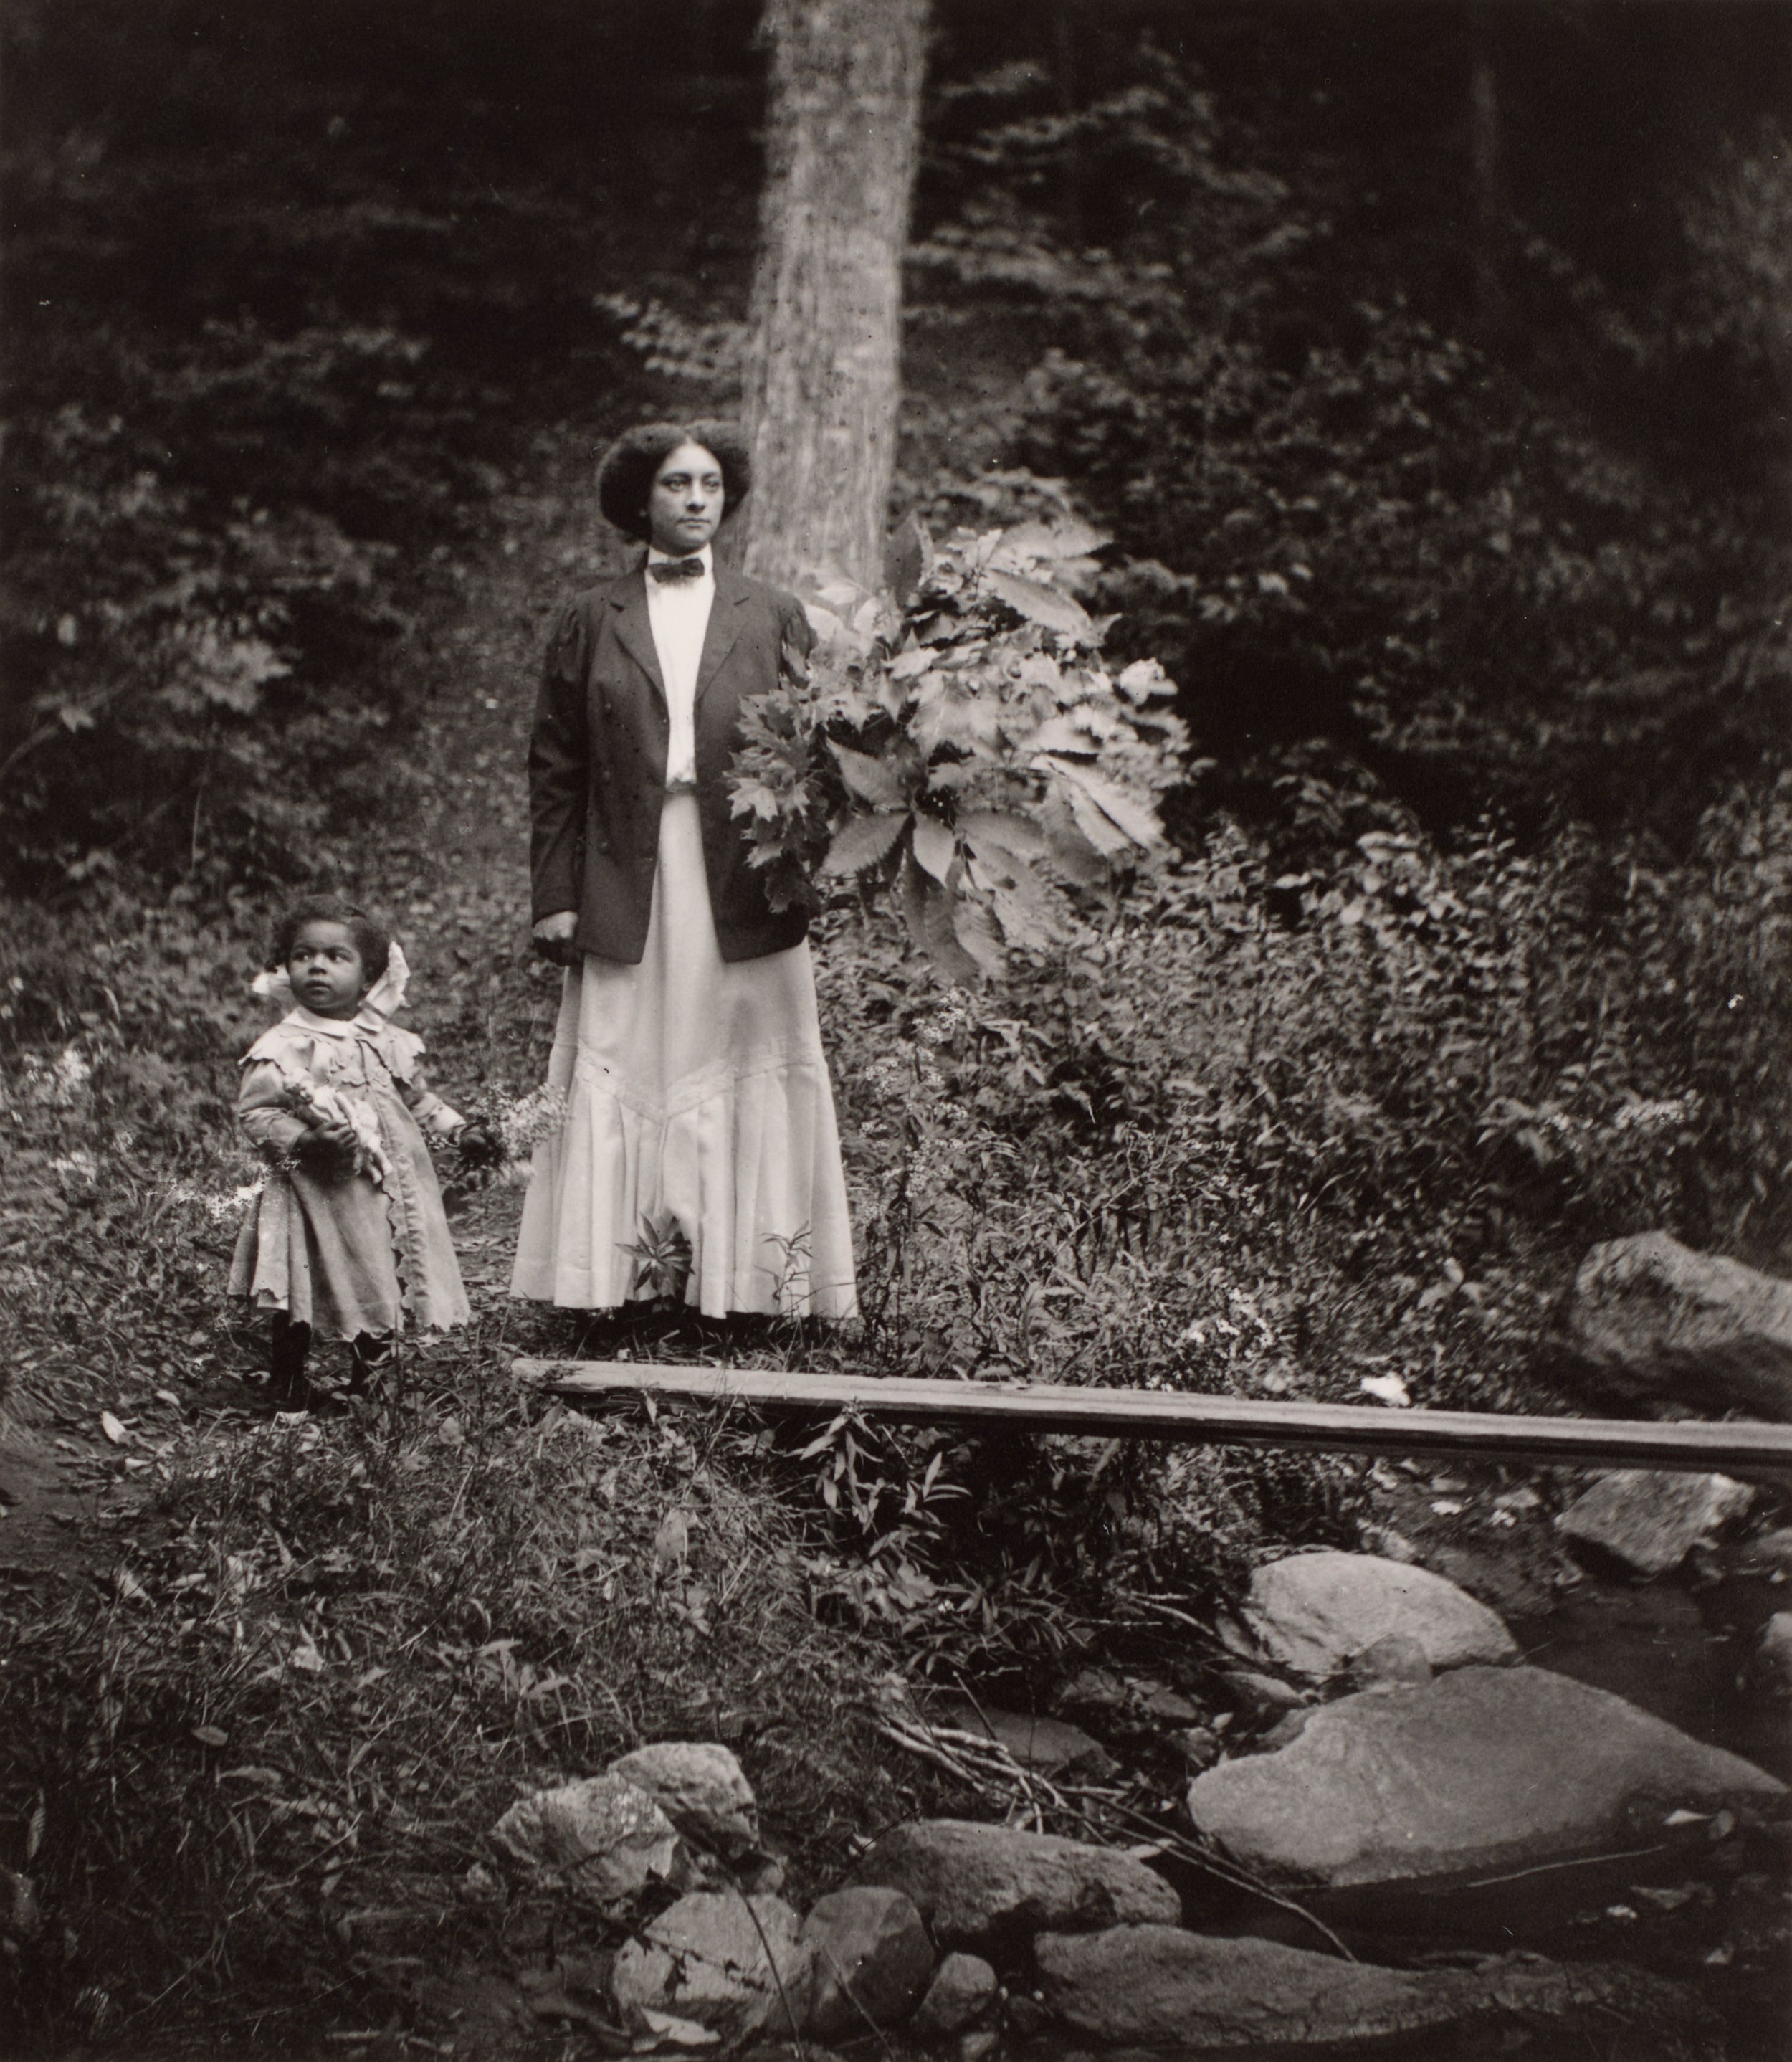  James Van Der Zee (United States, 1886–1983),  Kate and Rachel Van Der Zee, Lenox, Massachusetts , 1909, gelatin silver print, 7 1/4 x 6 1/4 inches. Promised Gift from the Judy Glickman Lauder Collection, 7.2021.4. Image courtesy Luc Demers. © James